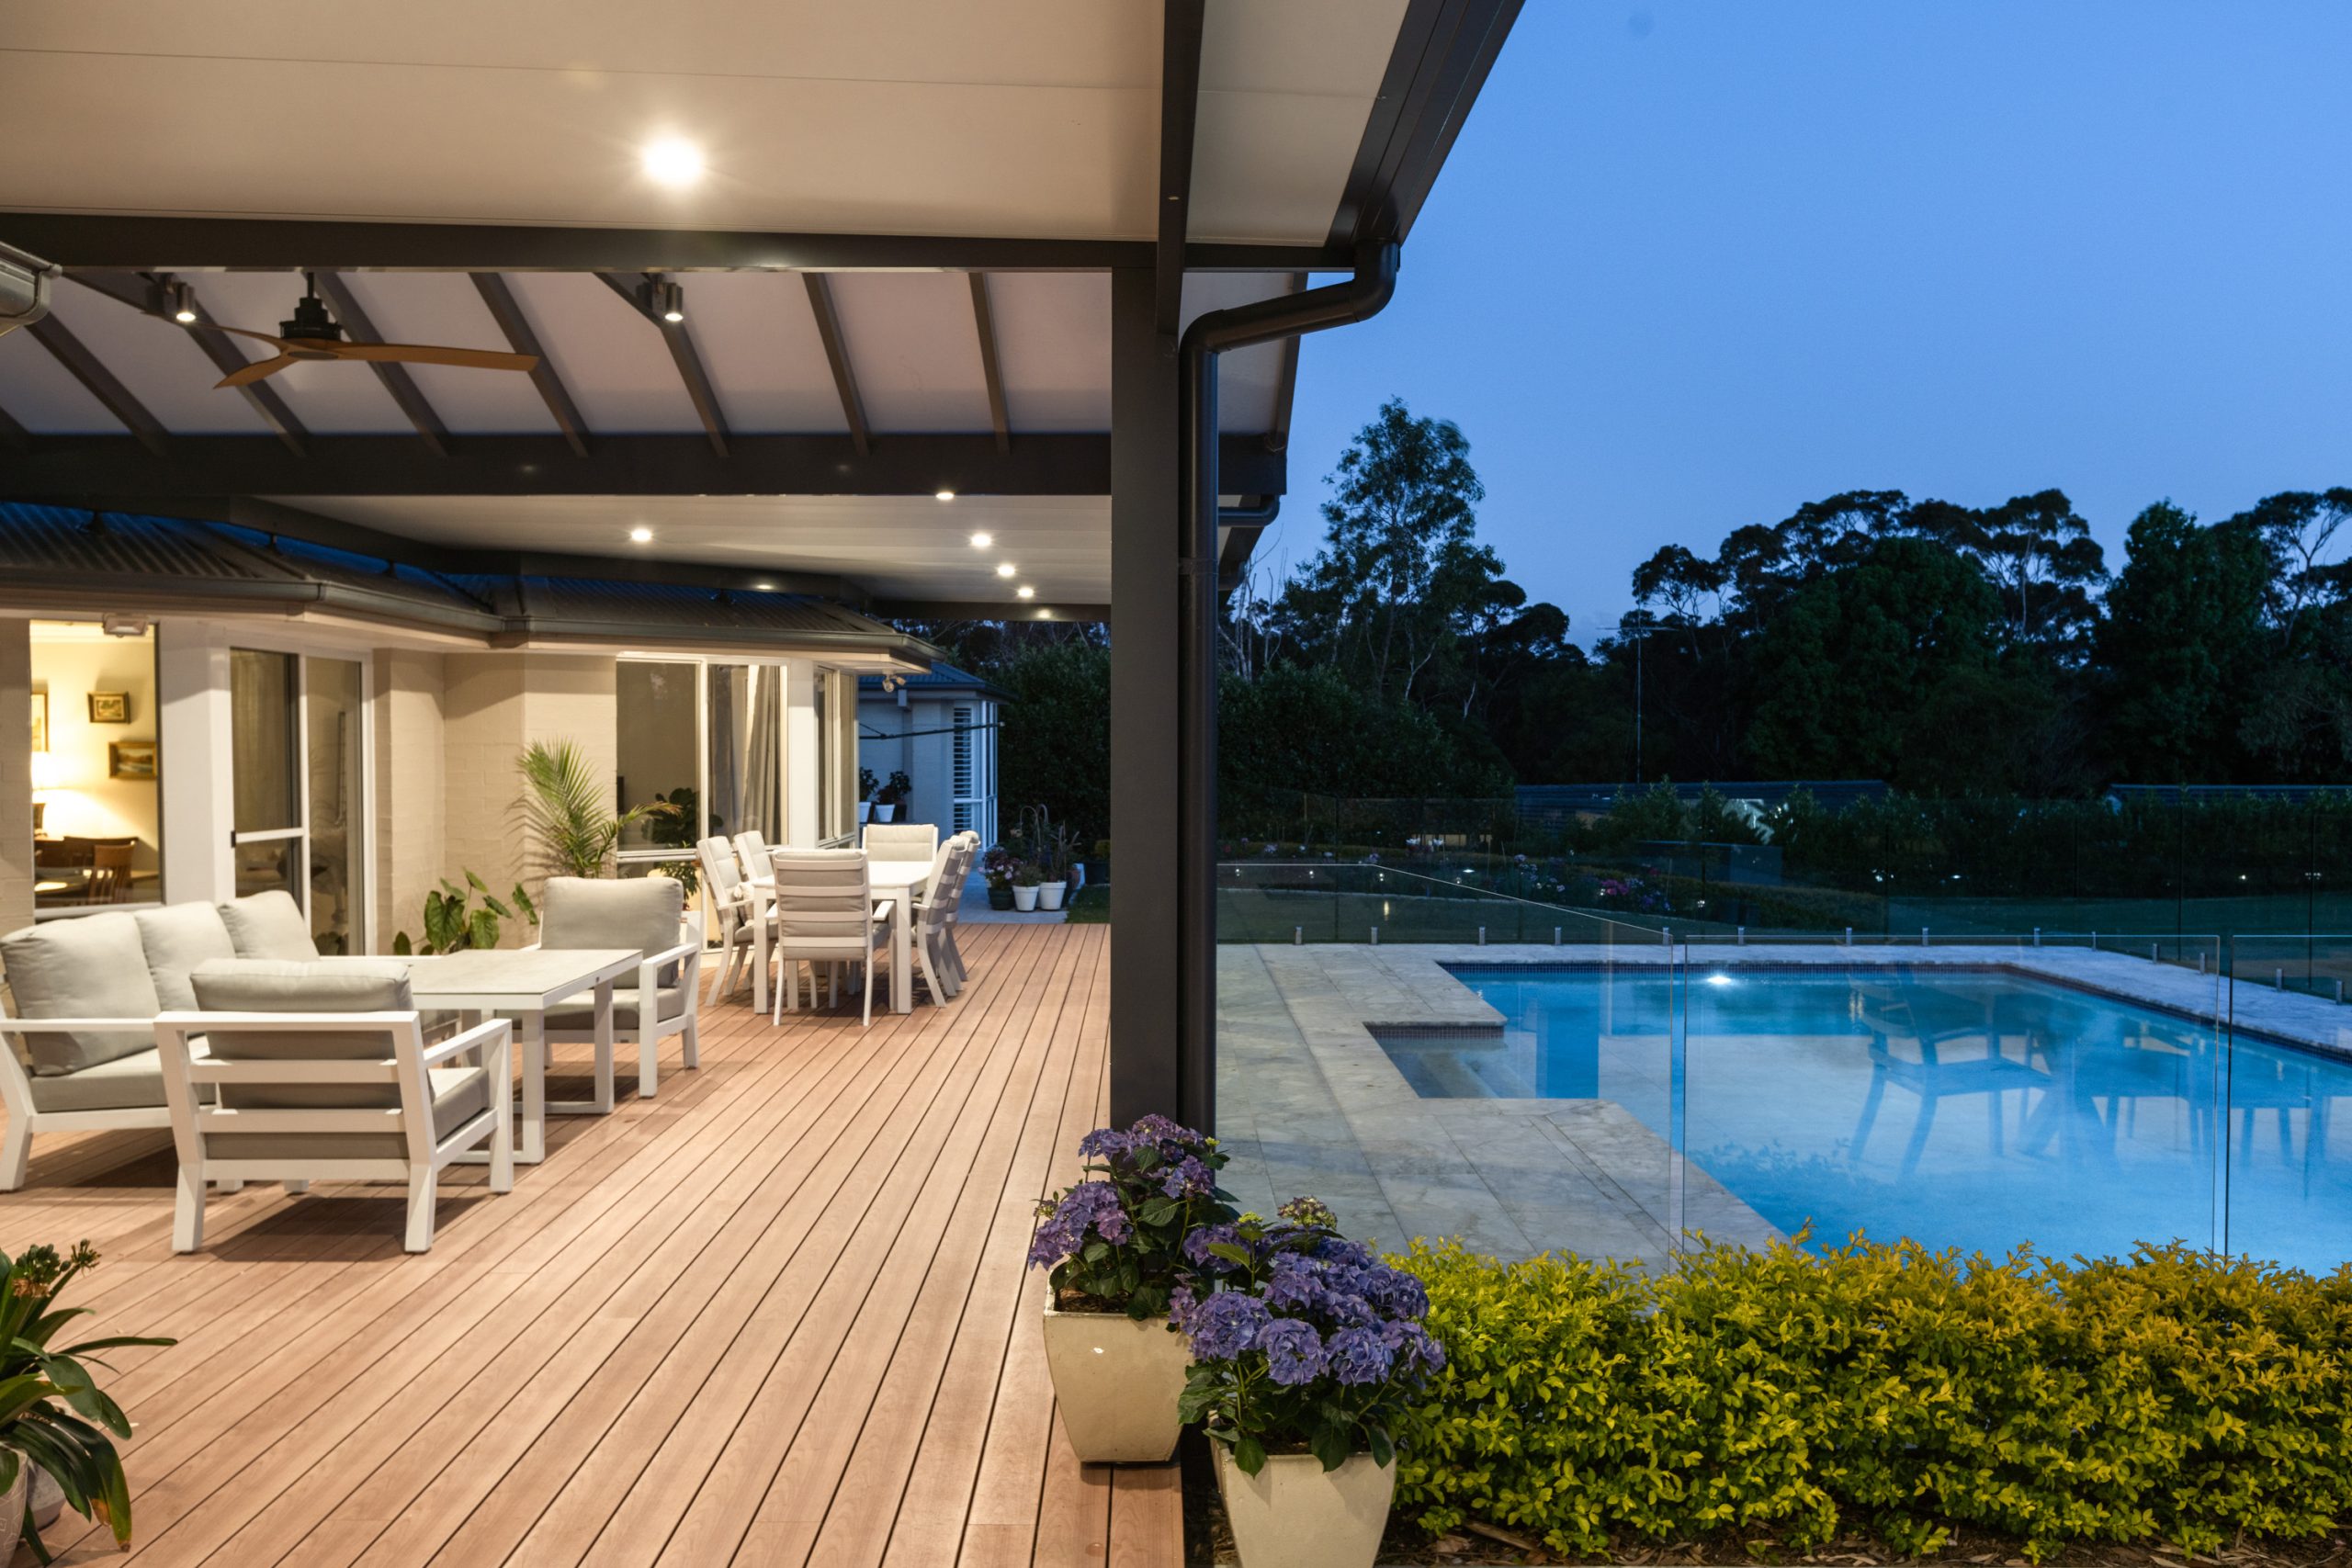 Patio next to pool - Outdoor Living in Annangrove